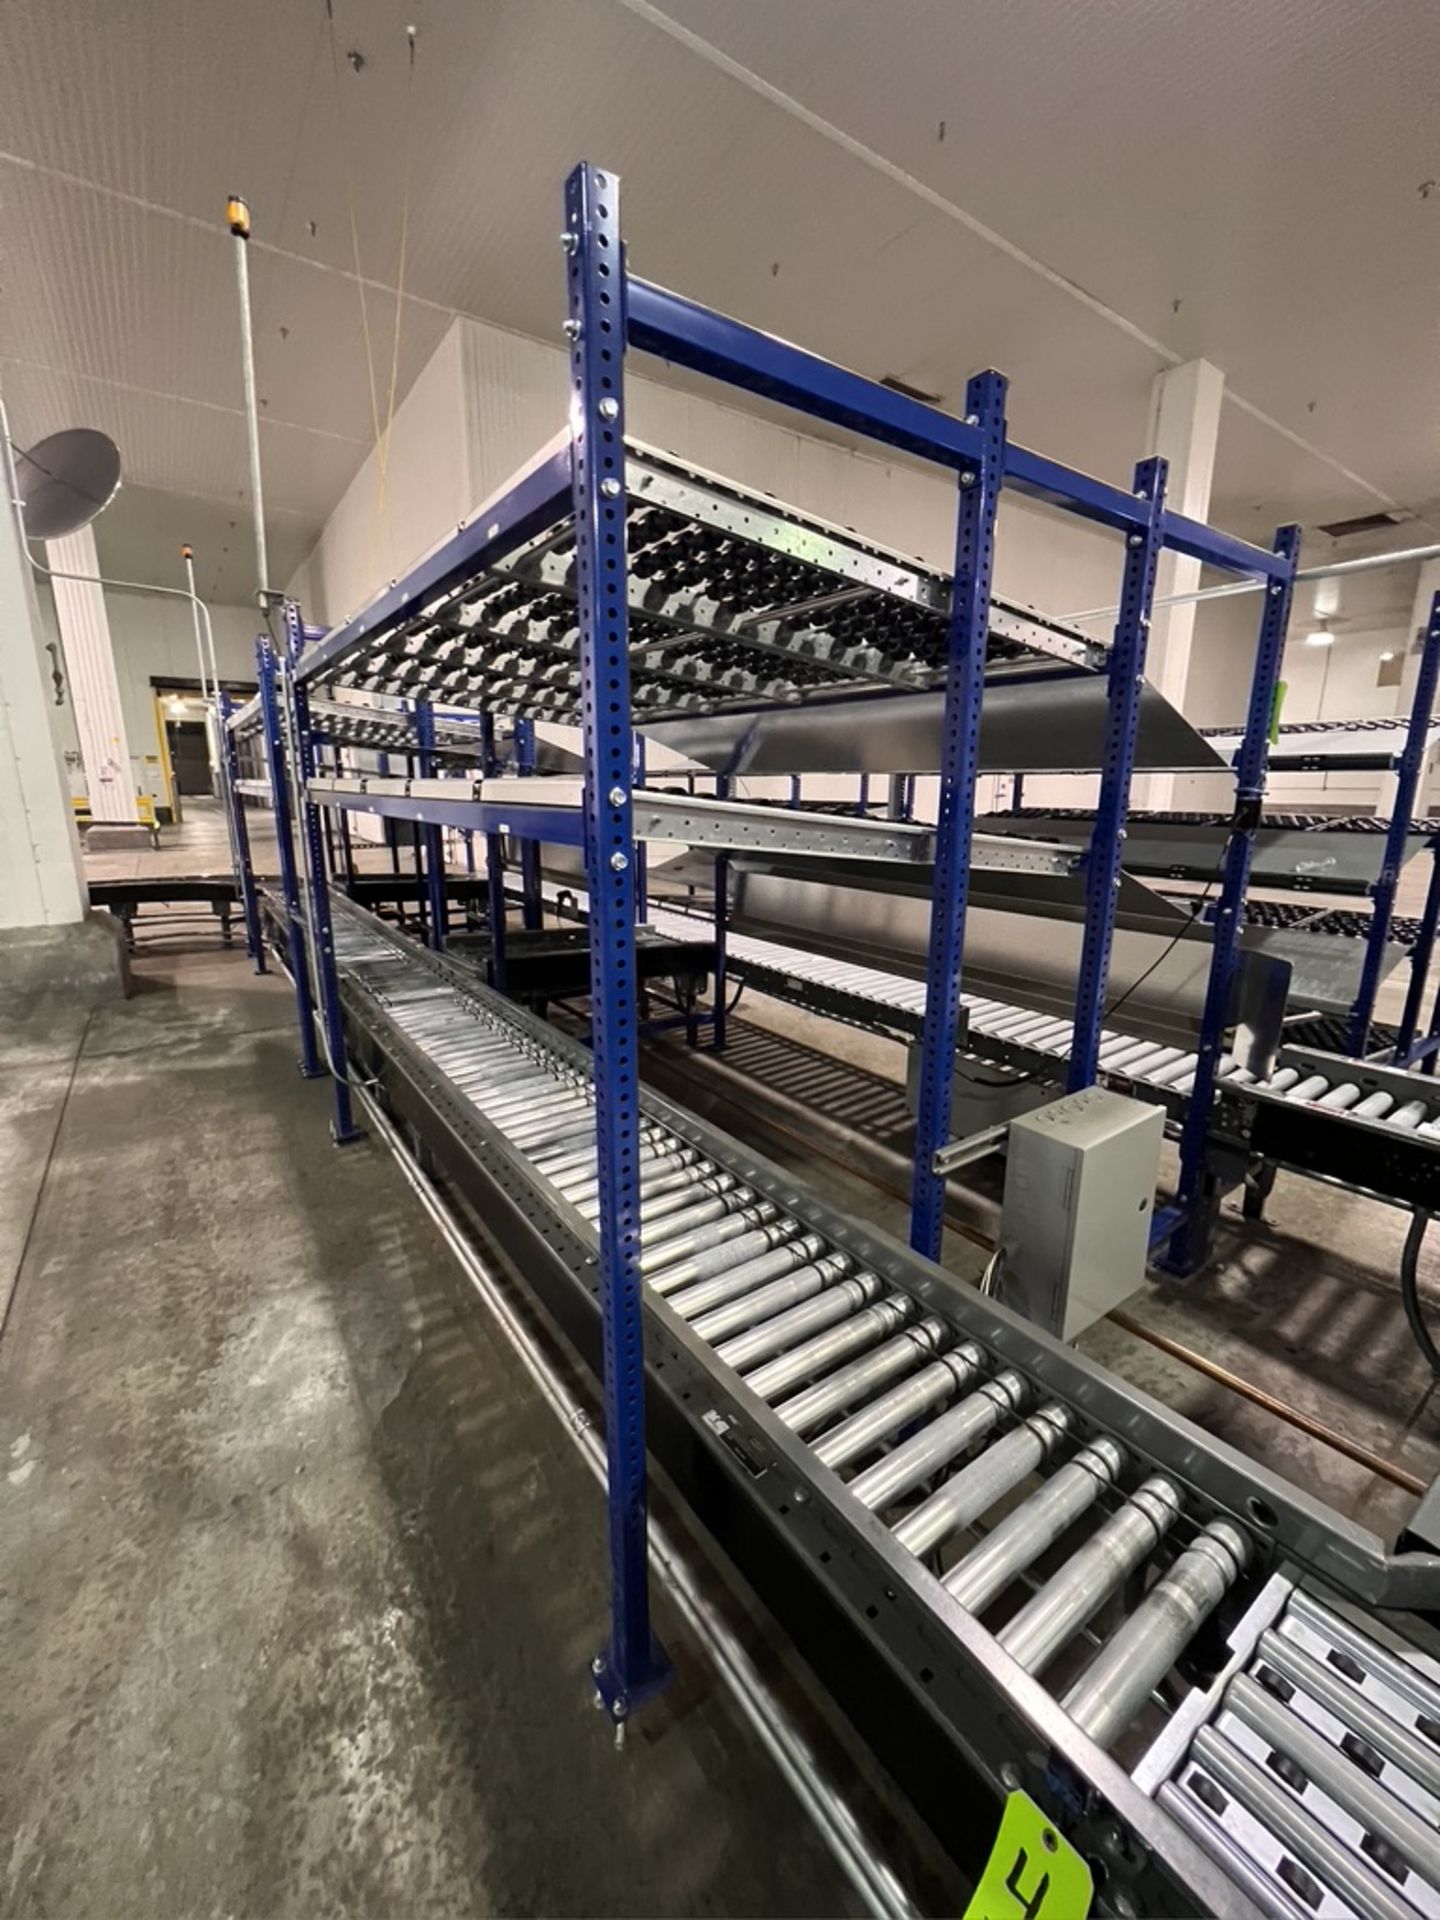 (2) UNEX SPAN TRACK PRODUCT PACK-OFF RACKS, WITH ROLLER CONVEYOR, INCLUDES SINGLE DOOR CONTROL PANEL - Image 17 of 18